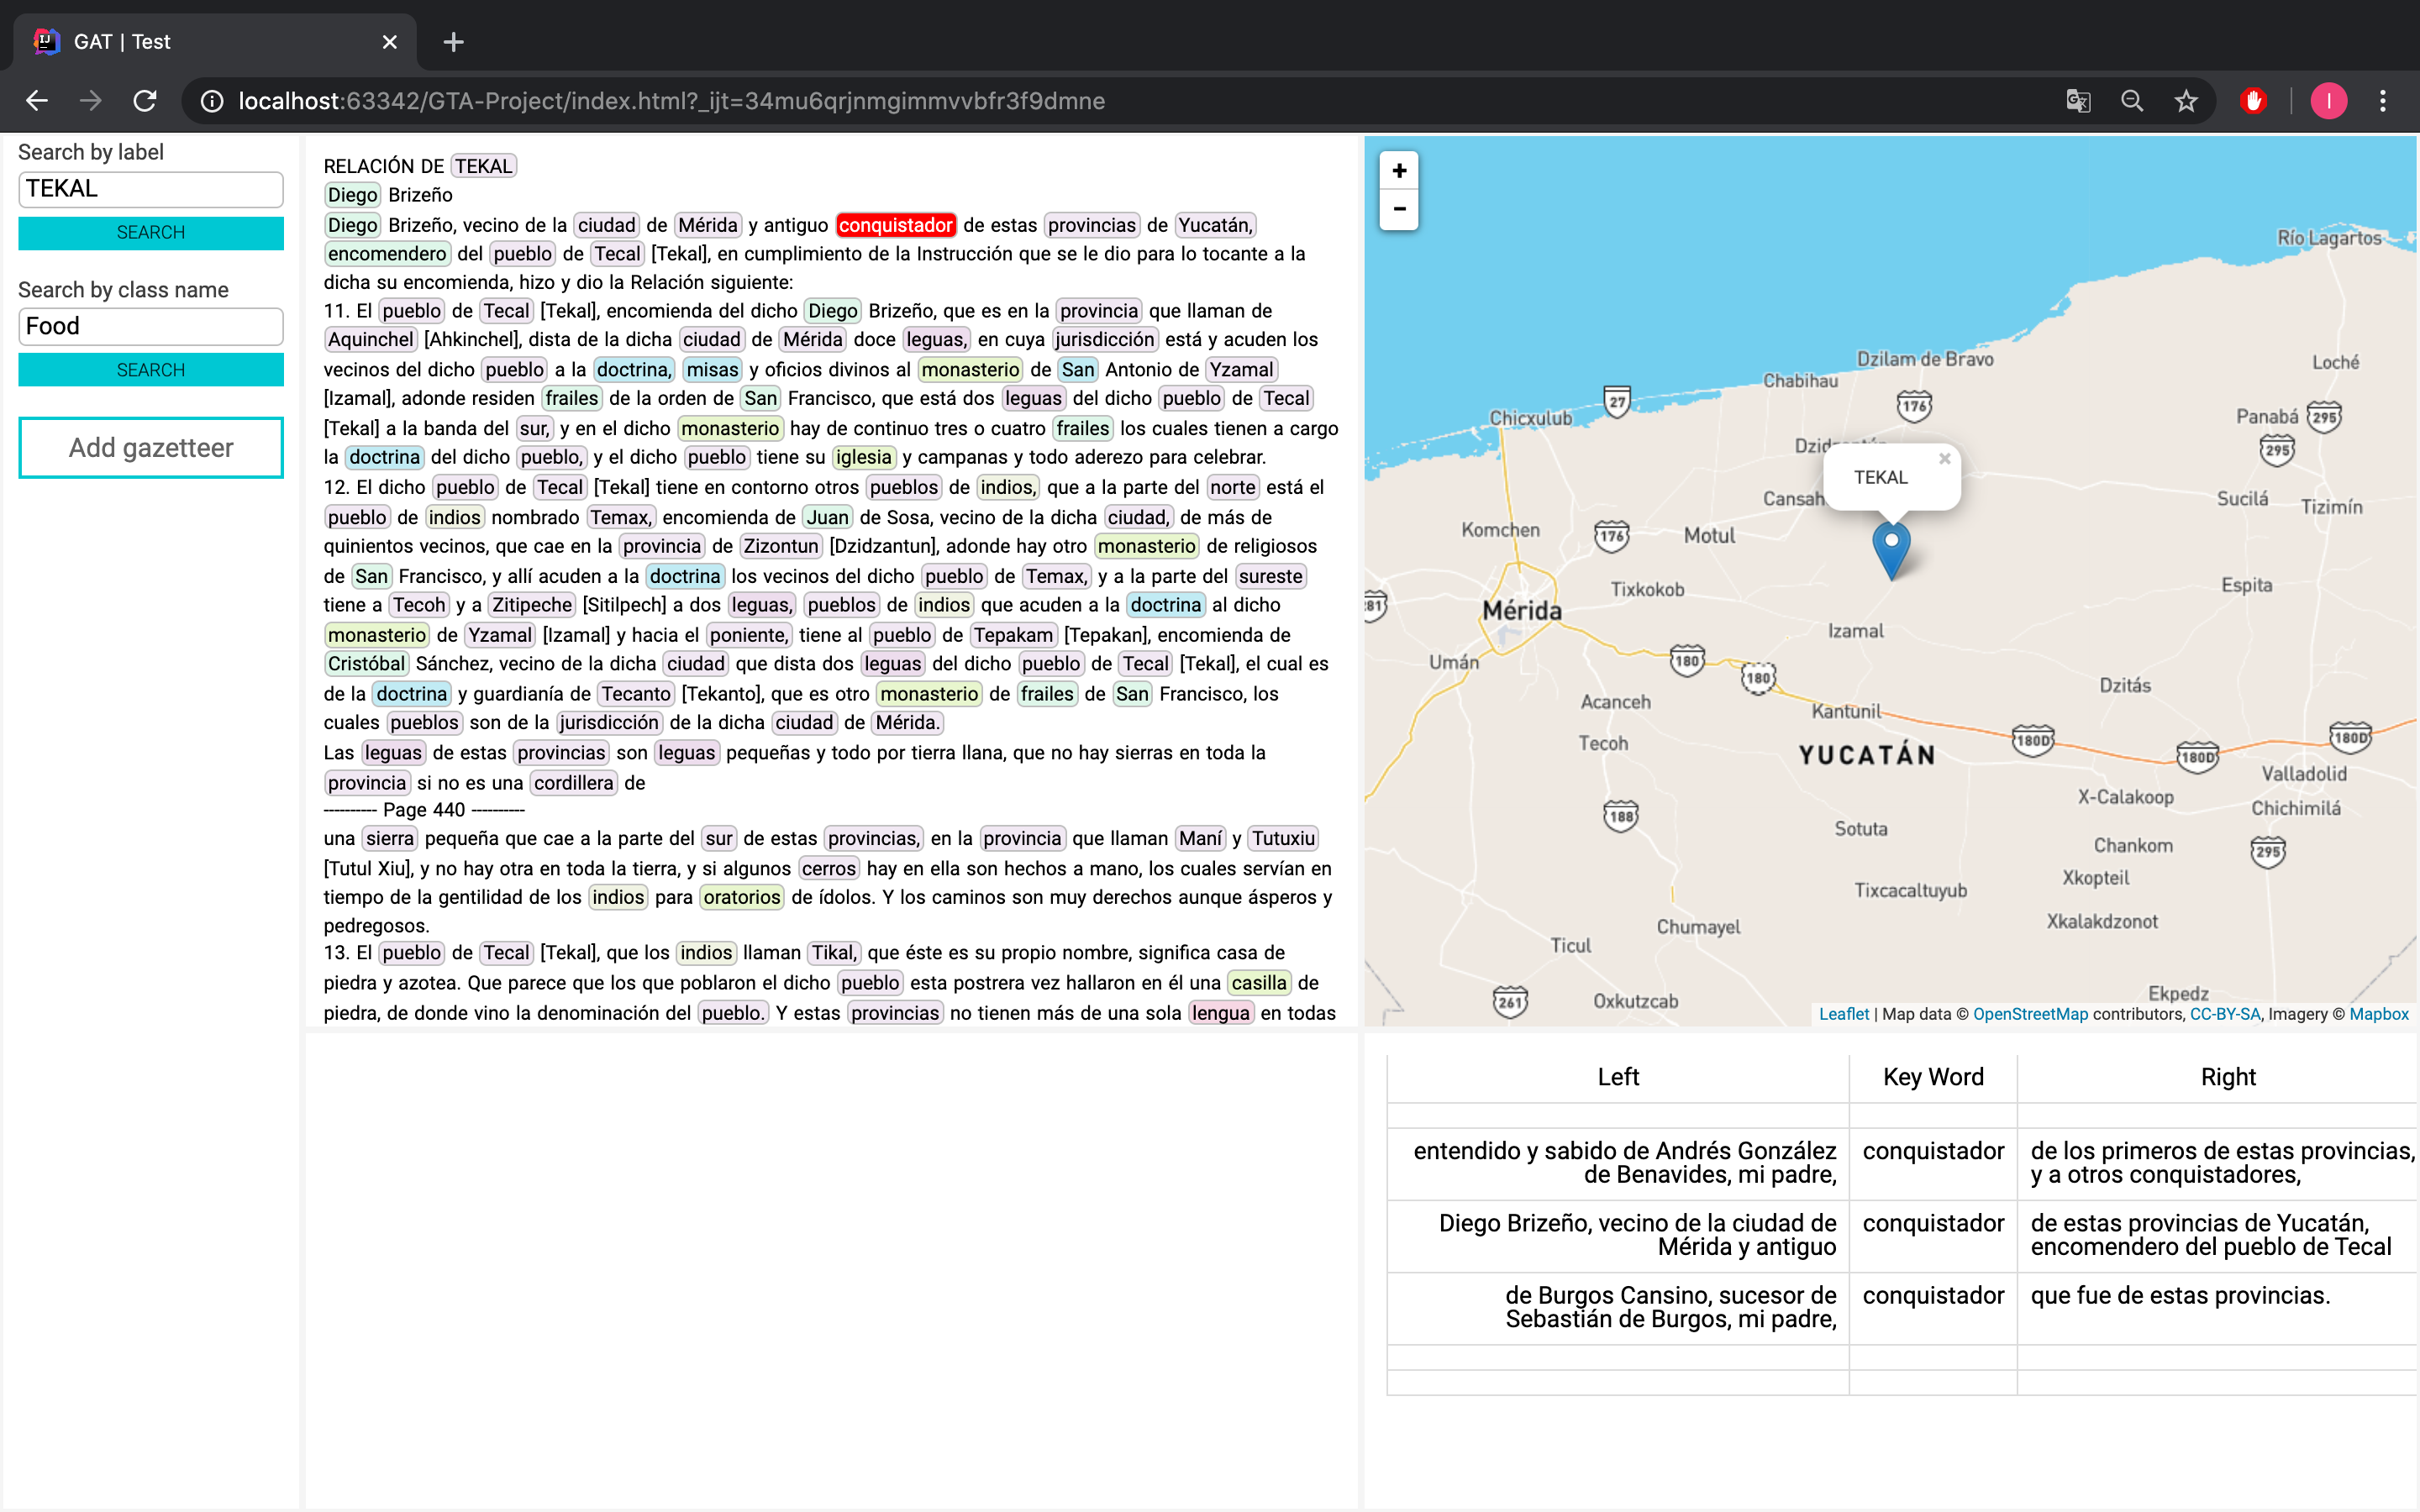 The GTA tool with words highlighted and an accompanying map.